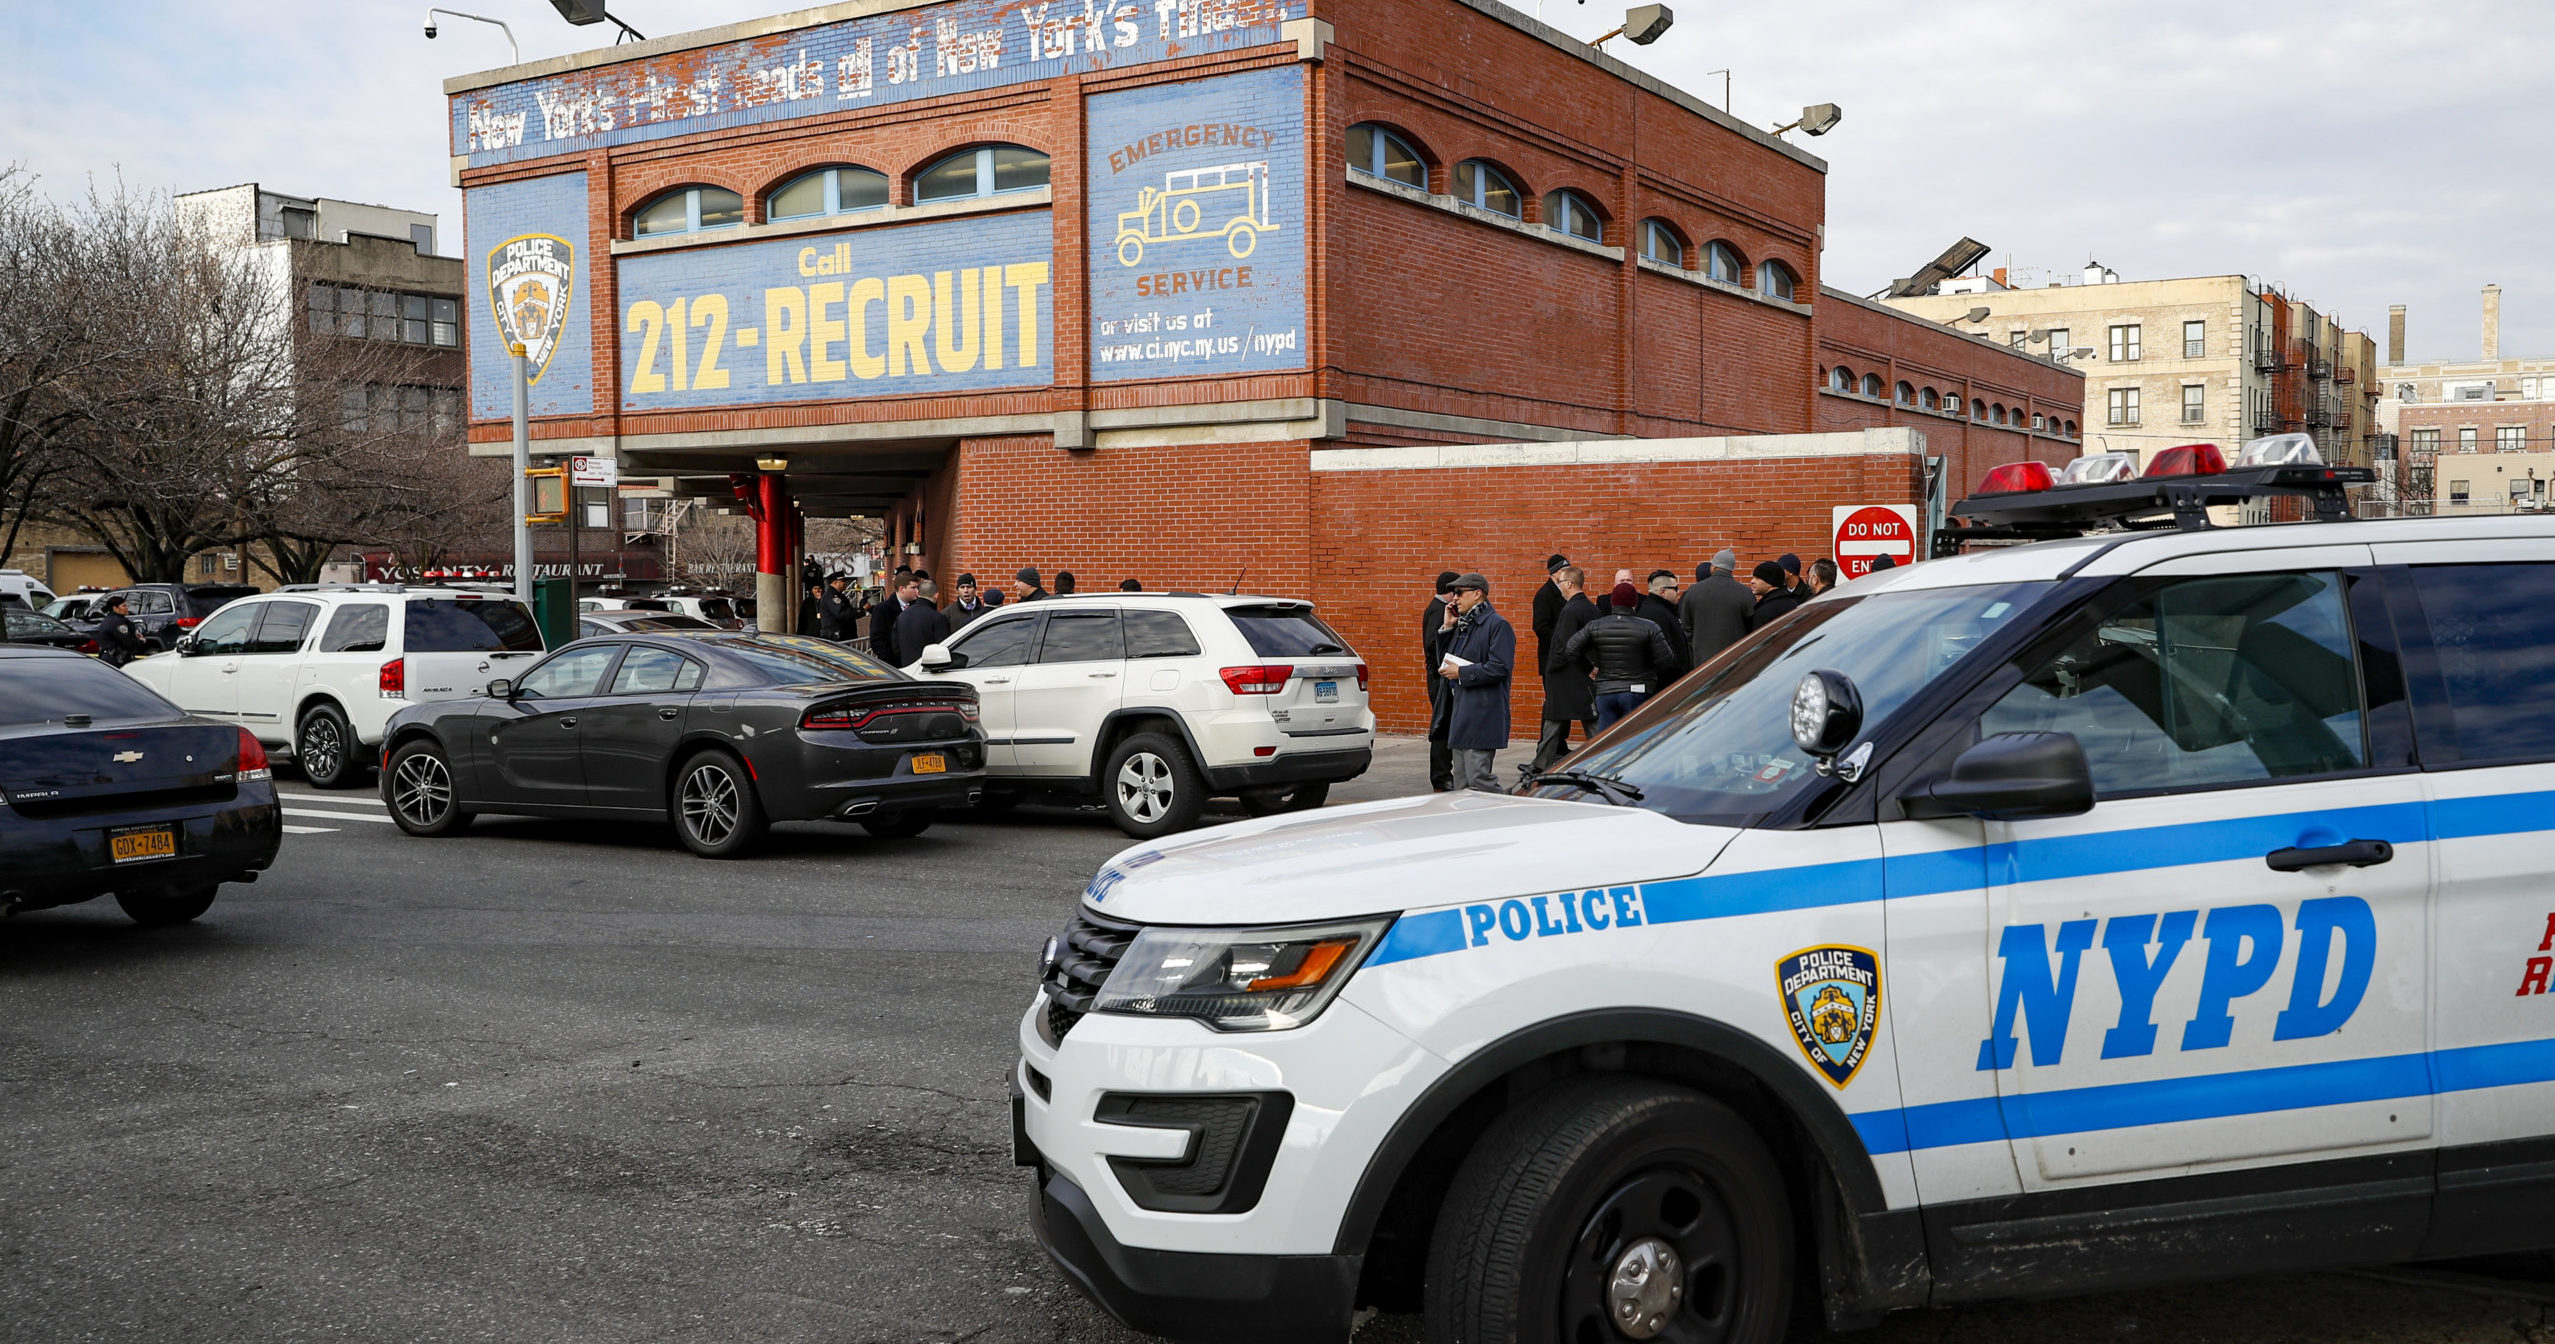 New York City police officers work the scene of a police involved shooting Sunday, Feb. 9, 2020. A gunman who ambushed police in New York City twice in 12 hours, wounding two officers, has been sentenced to 23 years to life in prison, Friday, Oct. 20, 2023.